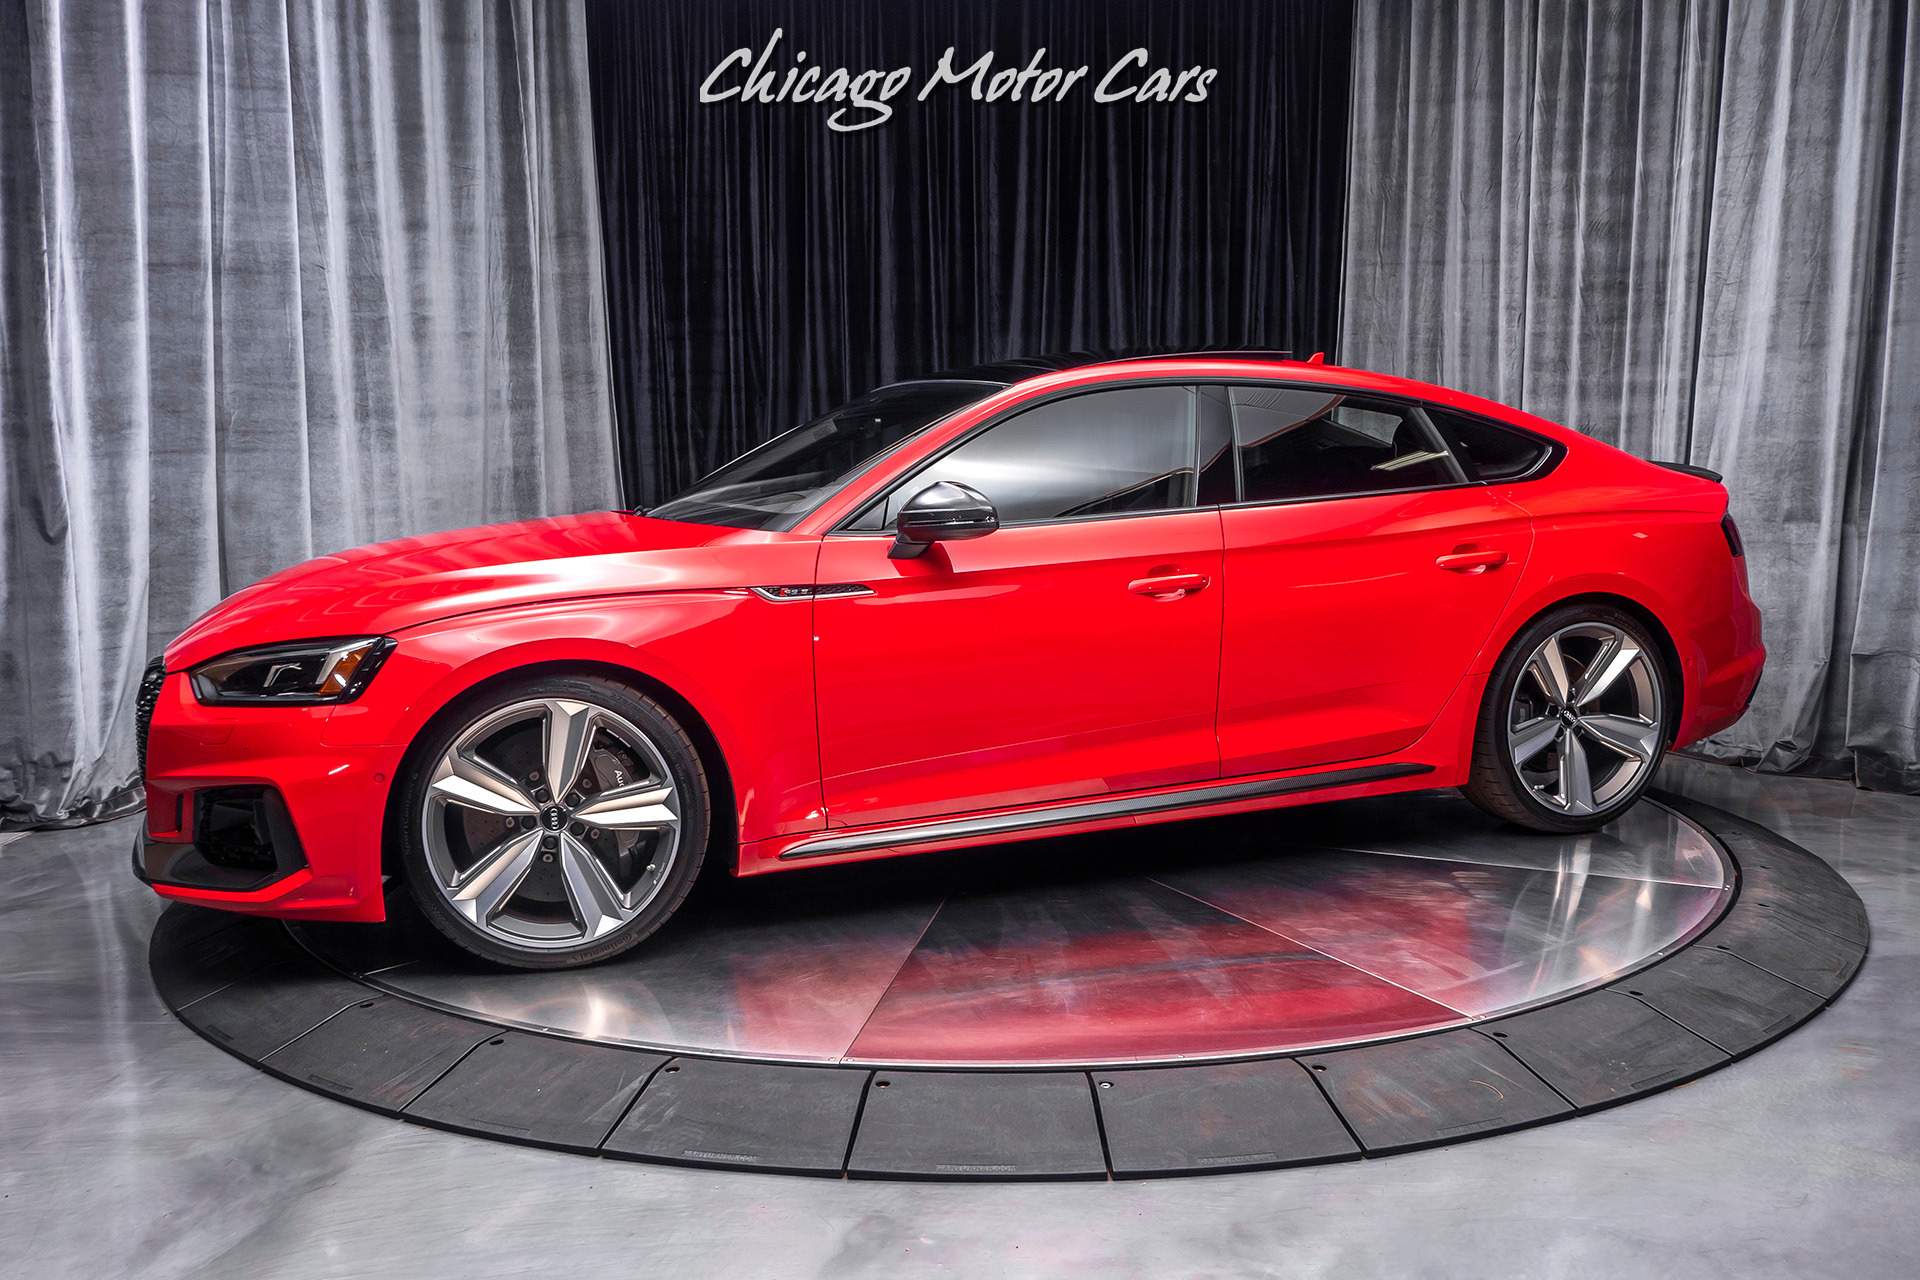 Used 2019 RS5 2.9T quattro MSRP DYNAMIC PLUS PACKAGE! For Sale (Special Pricing) | Chicago Motor Cars #16402